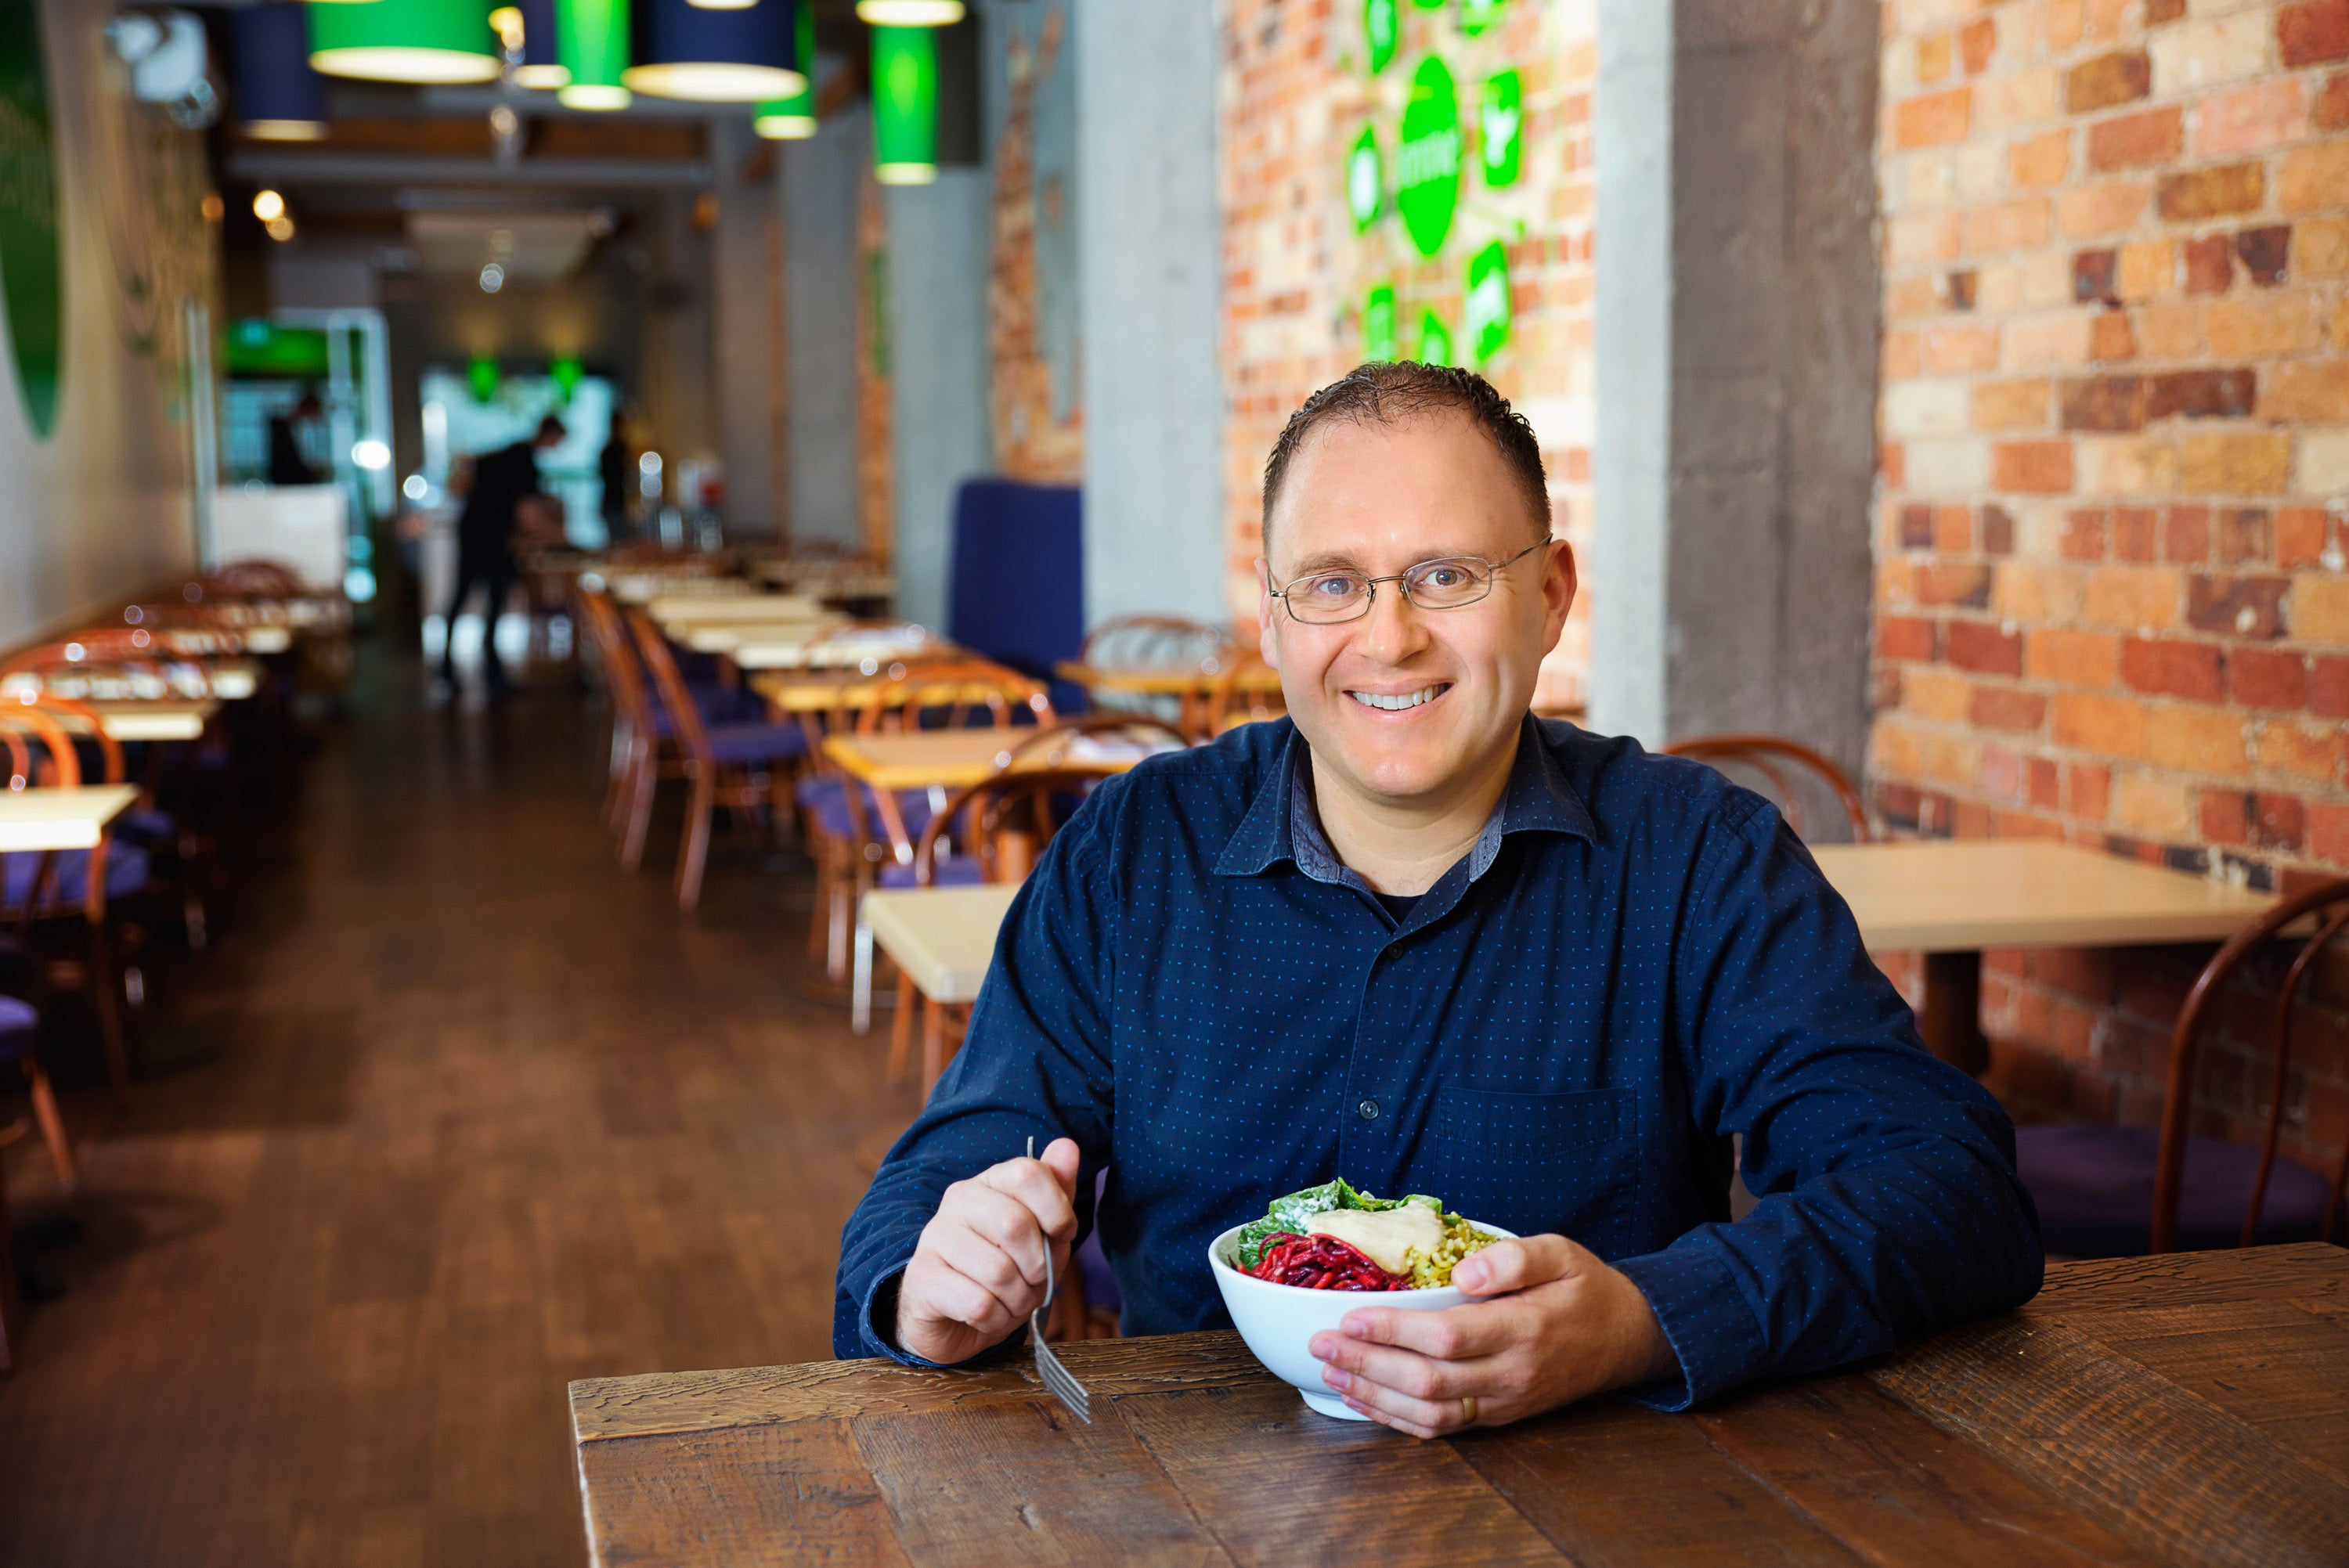 "I created Revive Cafe in 2005 to provide healthy food so people could have more energy and vitality." Jeremy Dixon - Founder.